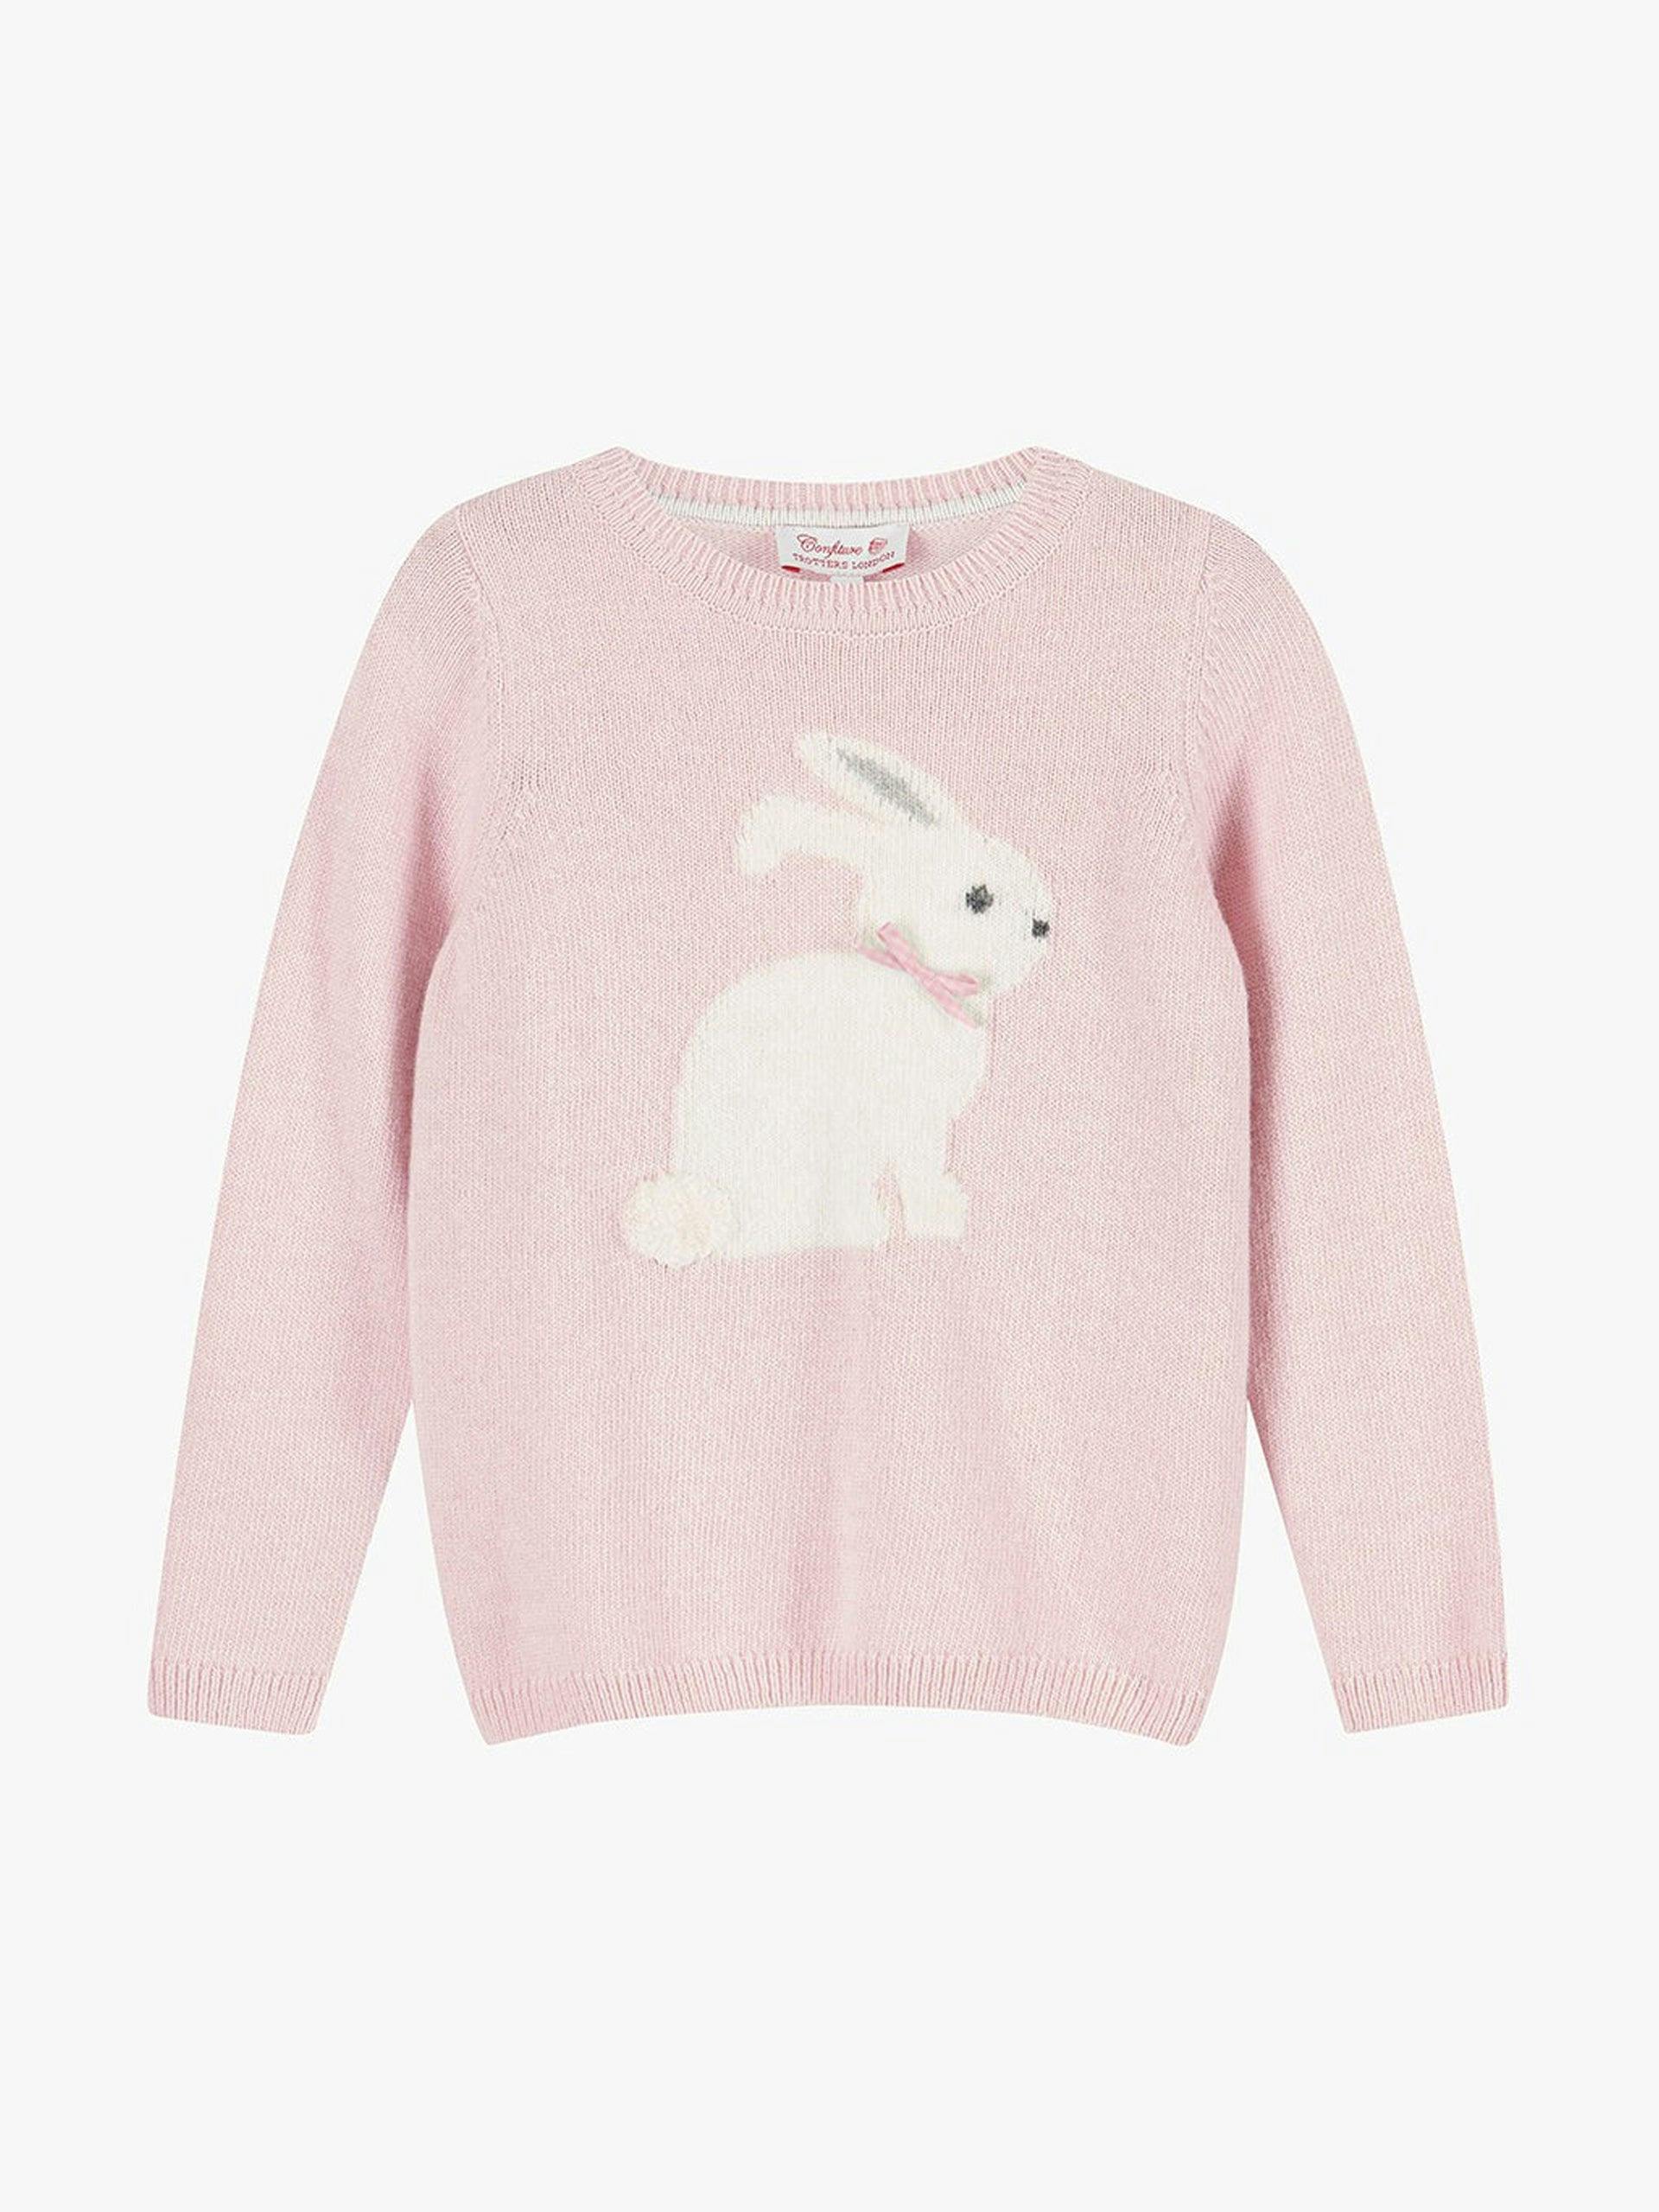 Coco pink bunny girls jumper